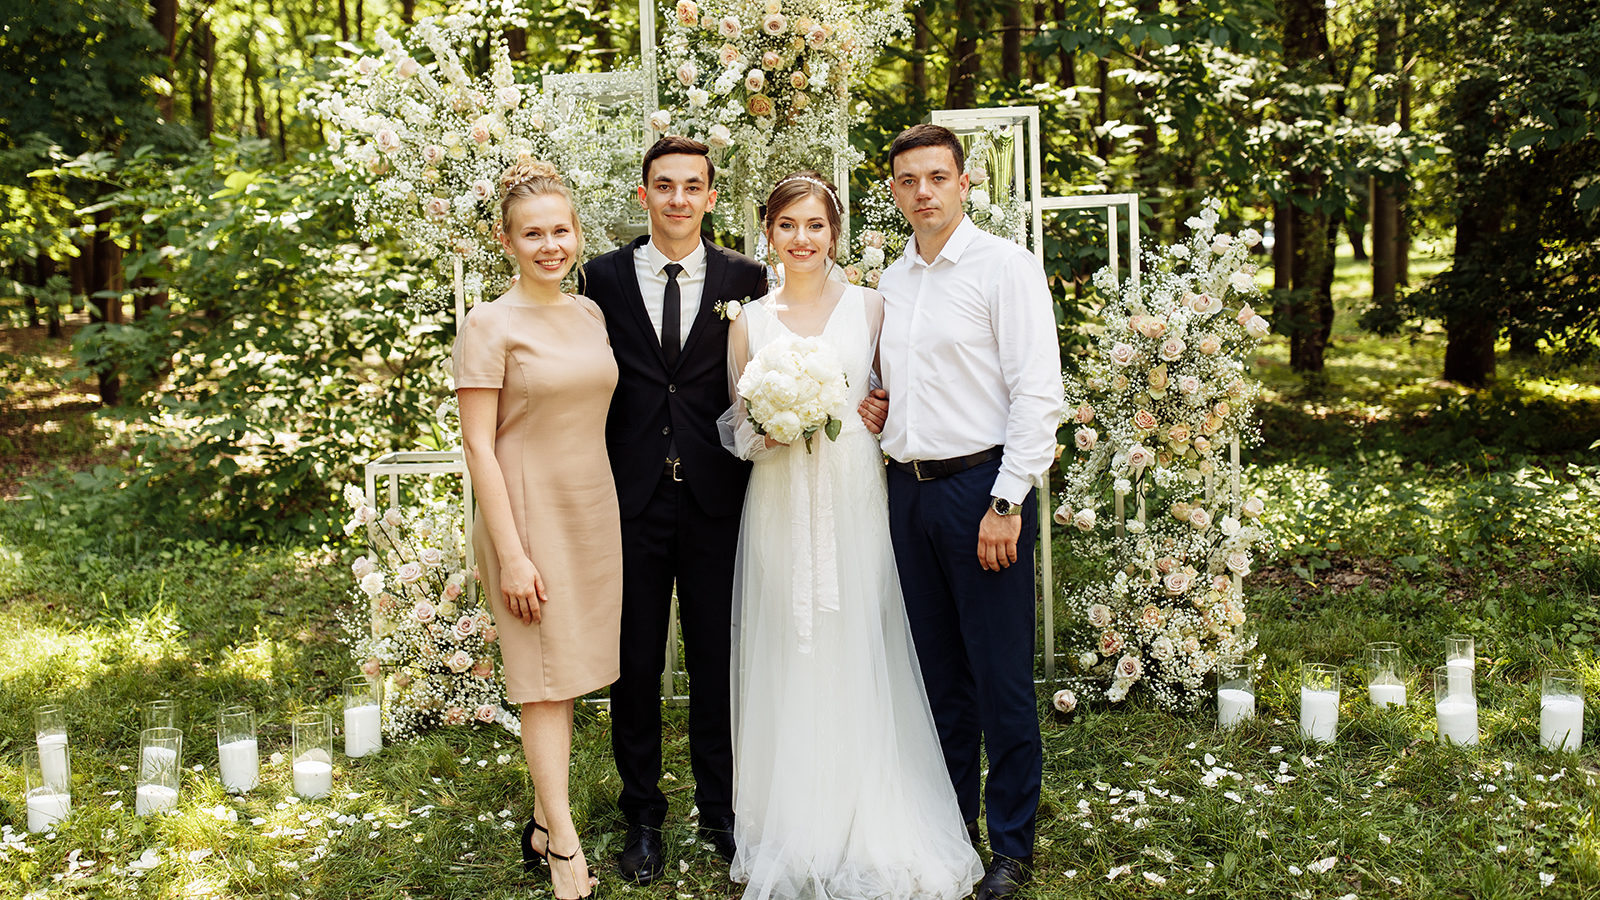 the newlyweds are photographed with family and friends. large group of people. A beautiful bride with a handsome groom is photographed with guests of different ages and nationalities against